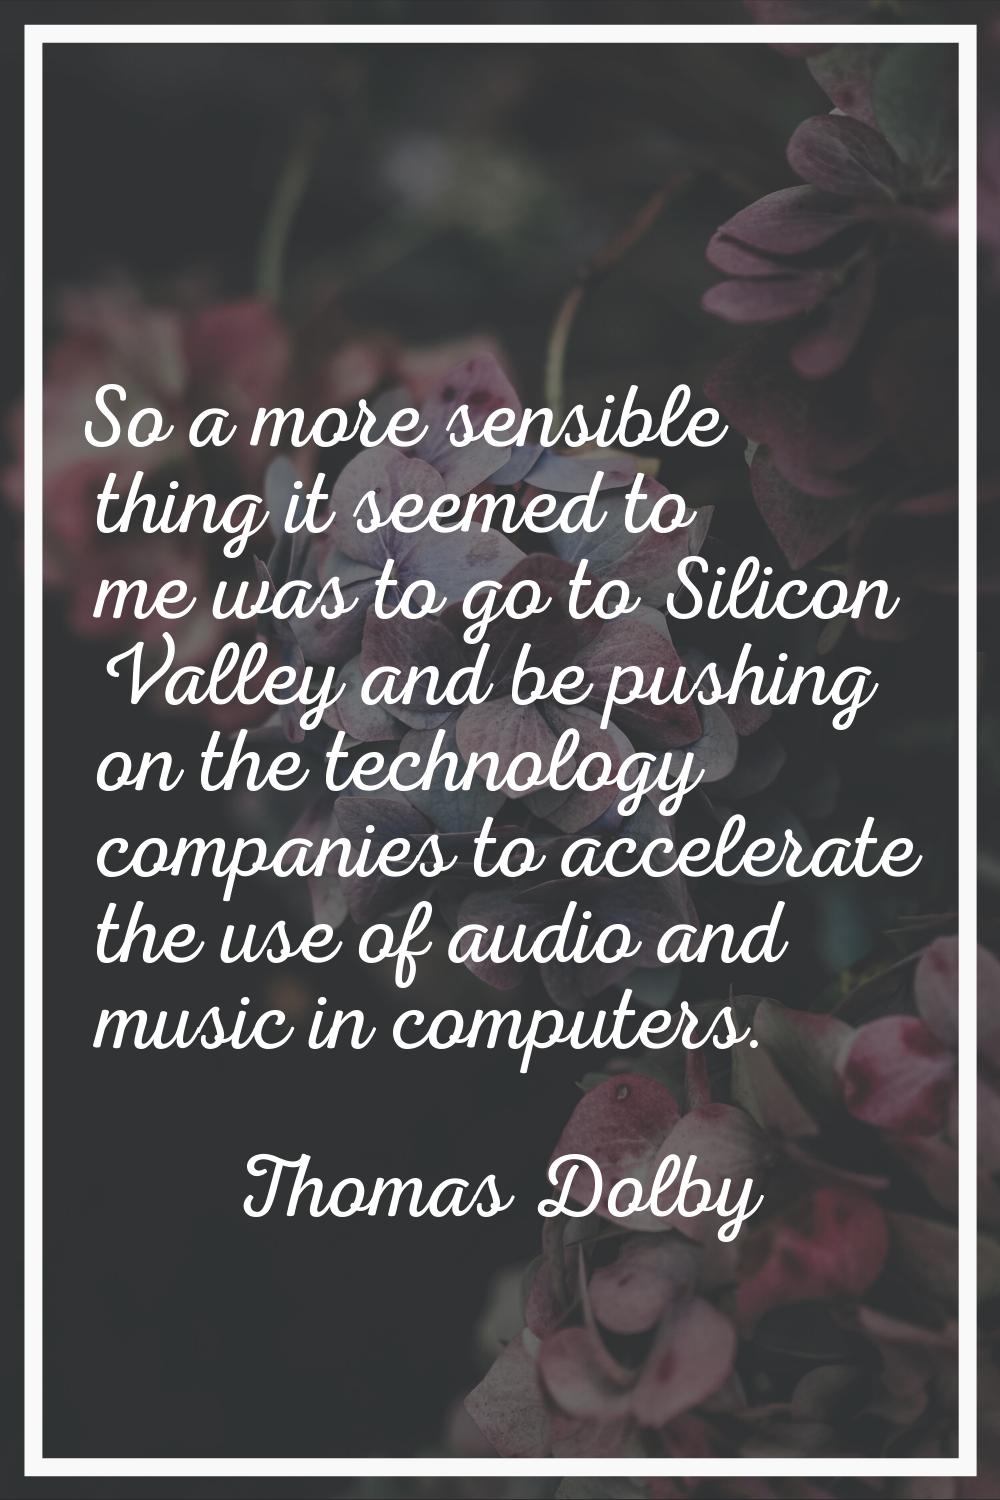 So a more sensible thing it seemed to me was to go to Silicon Valley and be pushing on the technolo